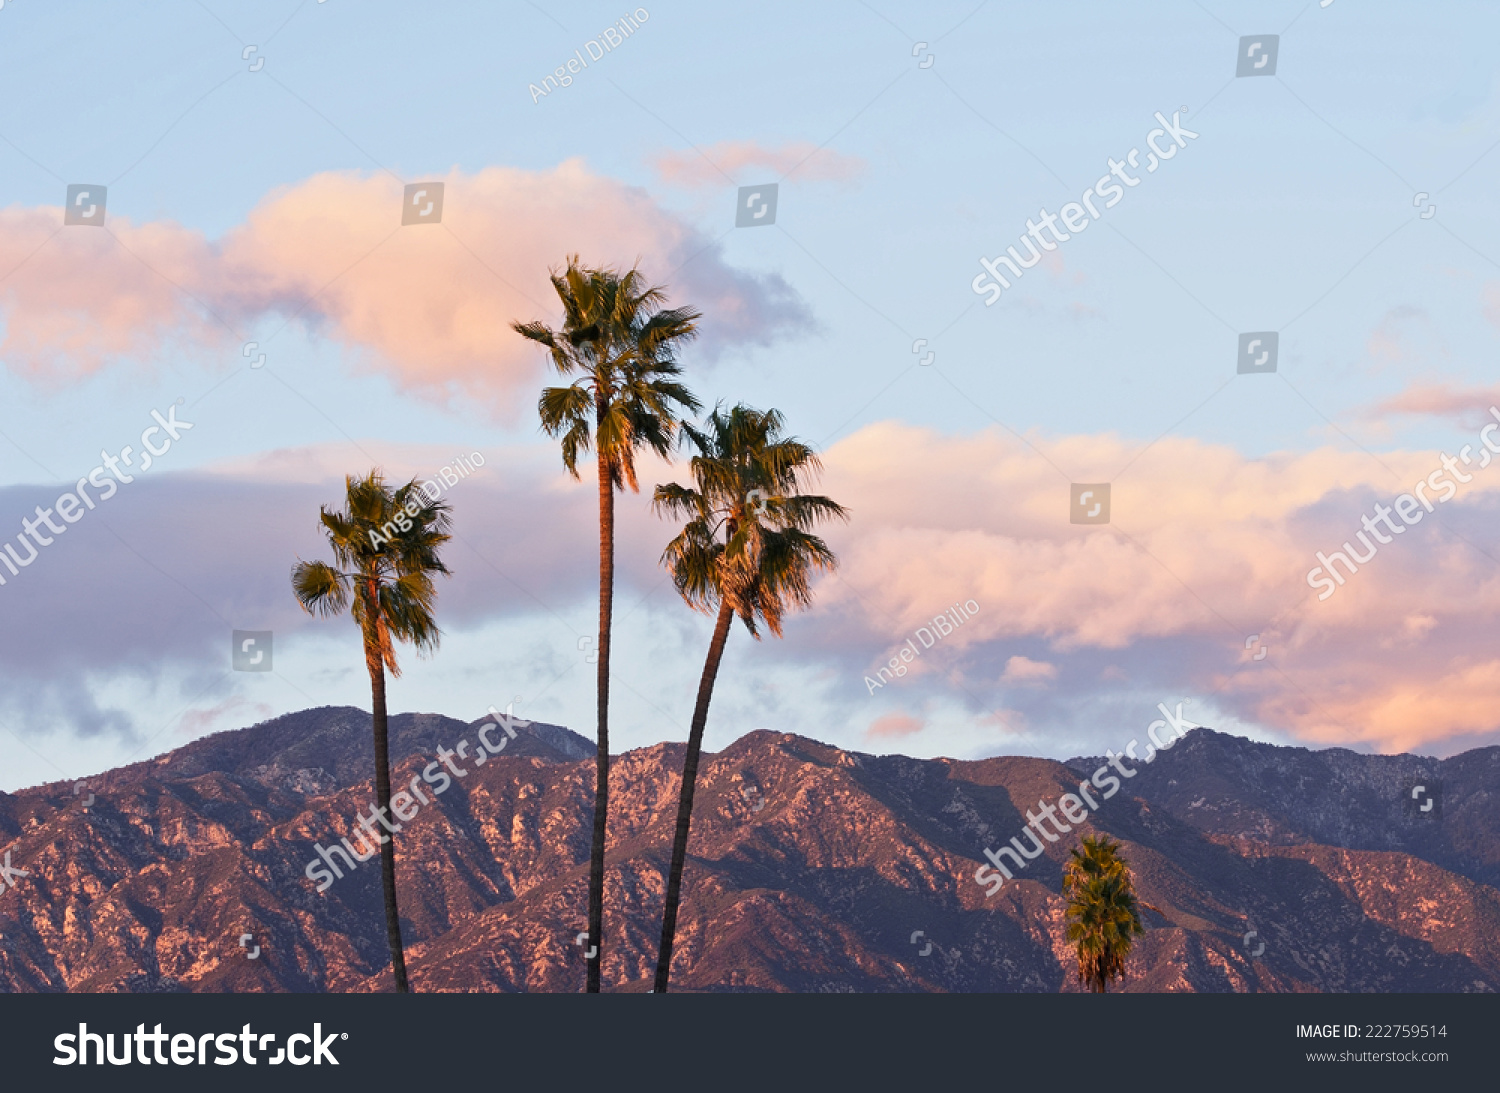 Palm trees, sunset clouds, nature background. Photo taken looking north from Pasadena, California, showing the San Gabriel Mountains in the background. #222759514